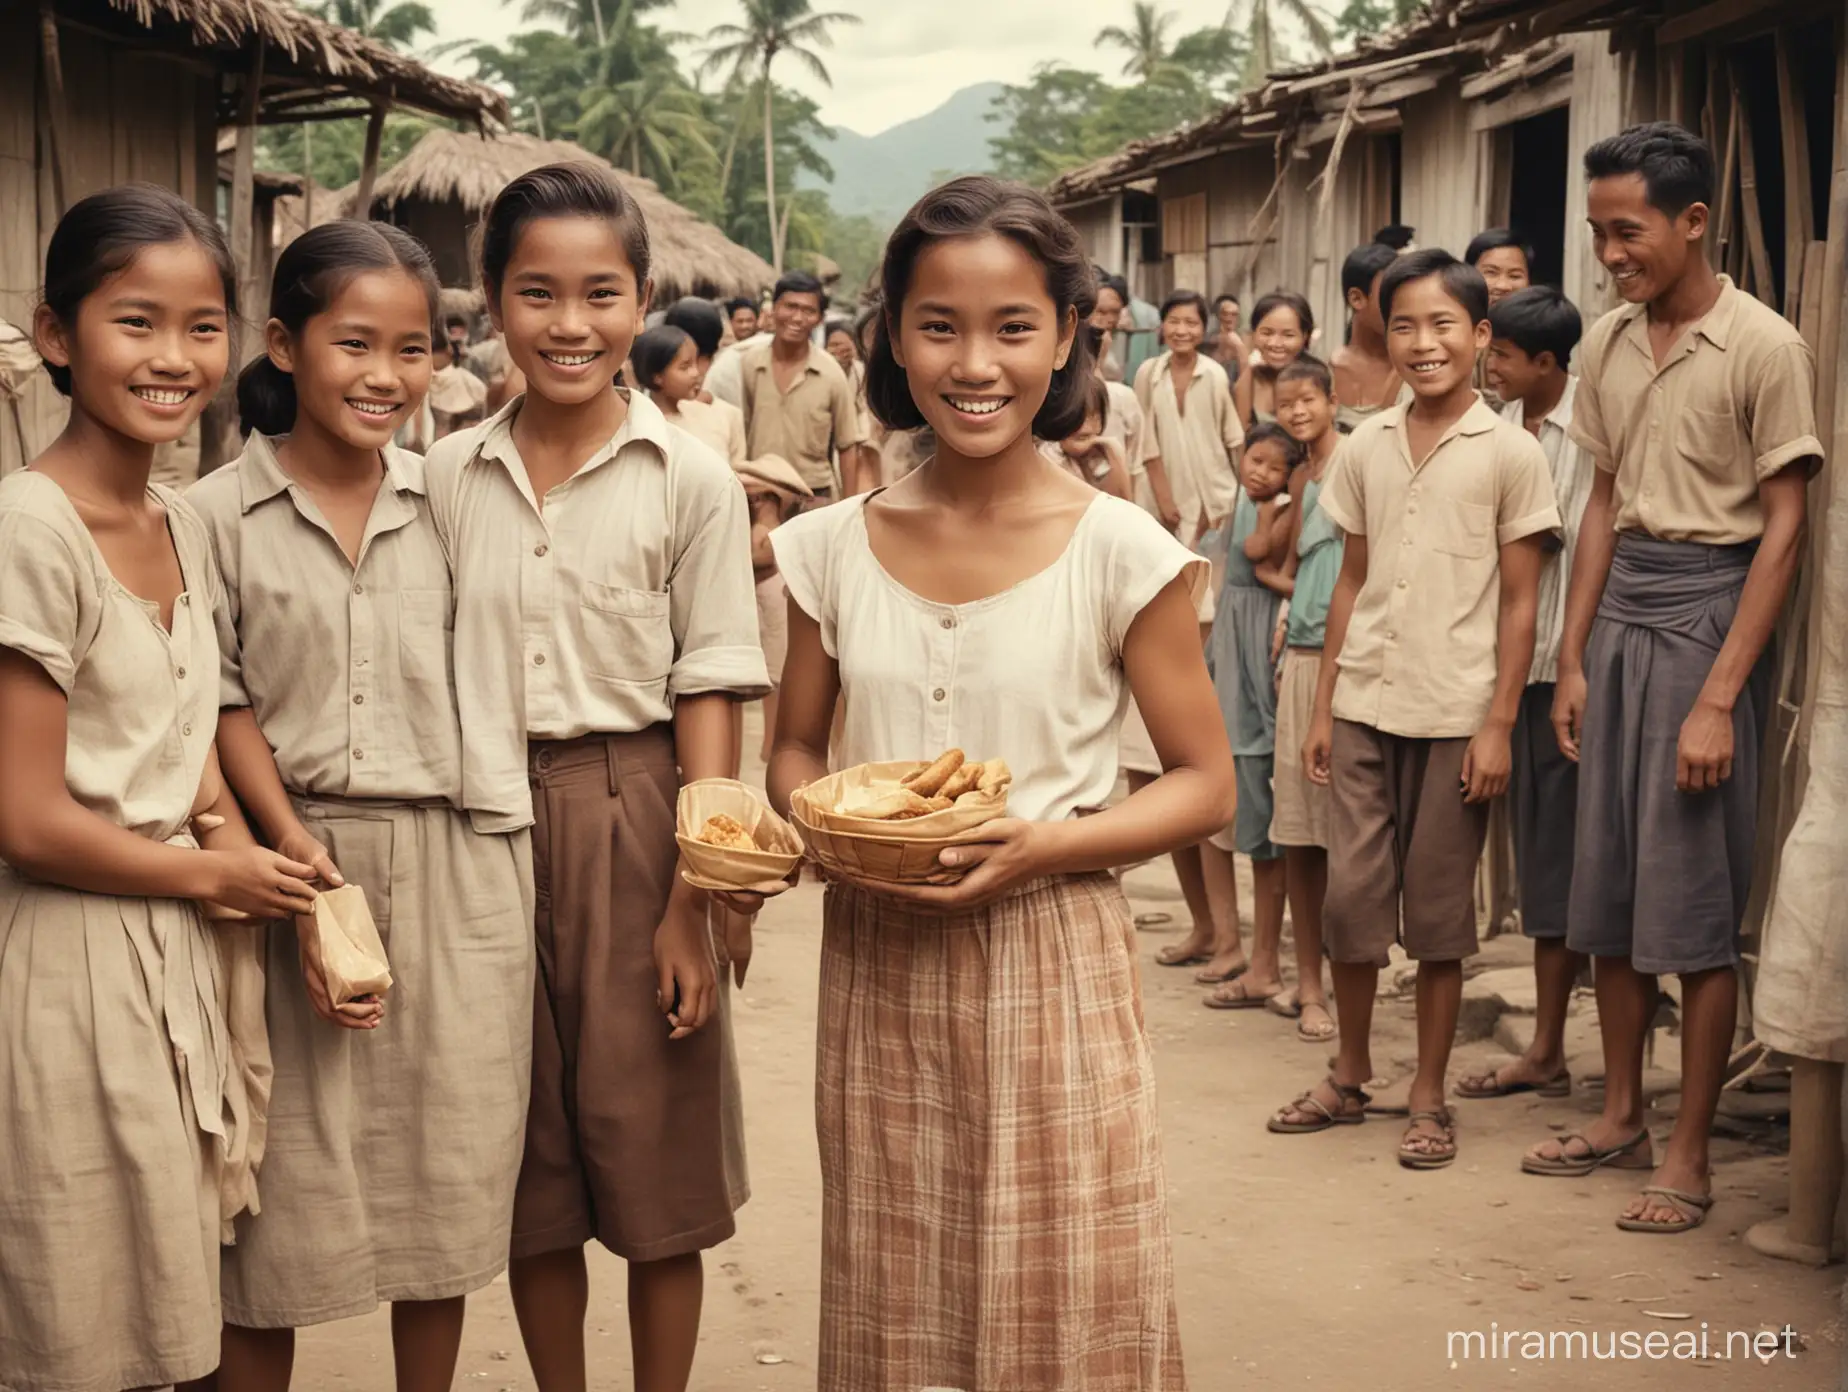 A young Filipina visitor being warmly recieved in a rural Philippine village in the 1950s, the locals are mixed male and female, young and old, they are offering her food and everybody is smiling, cinematic, colorized